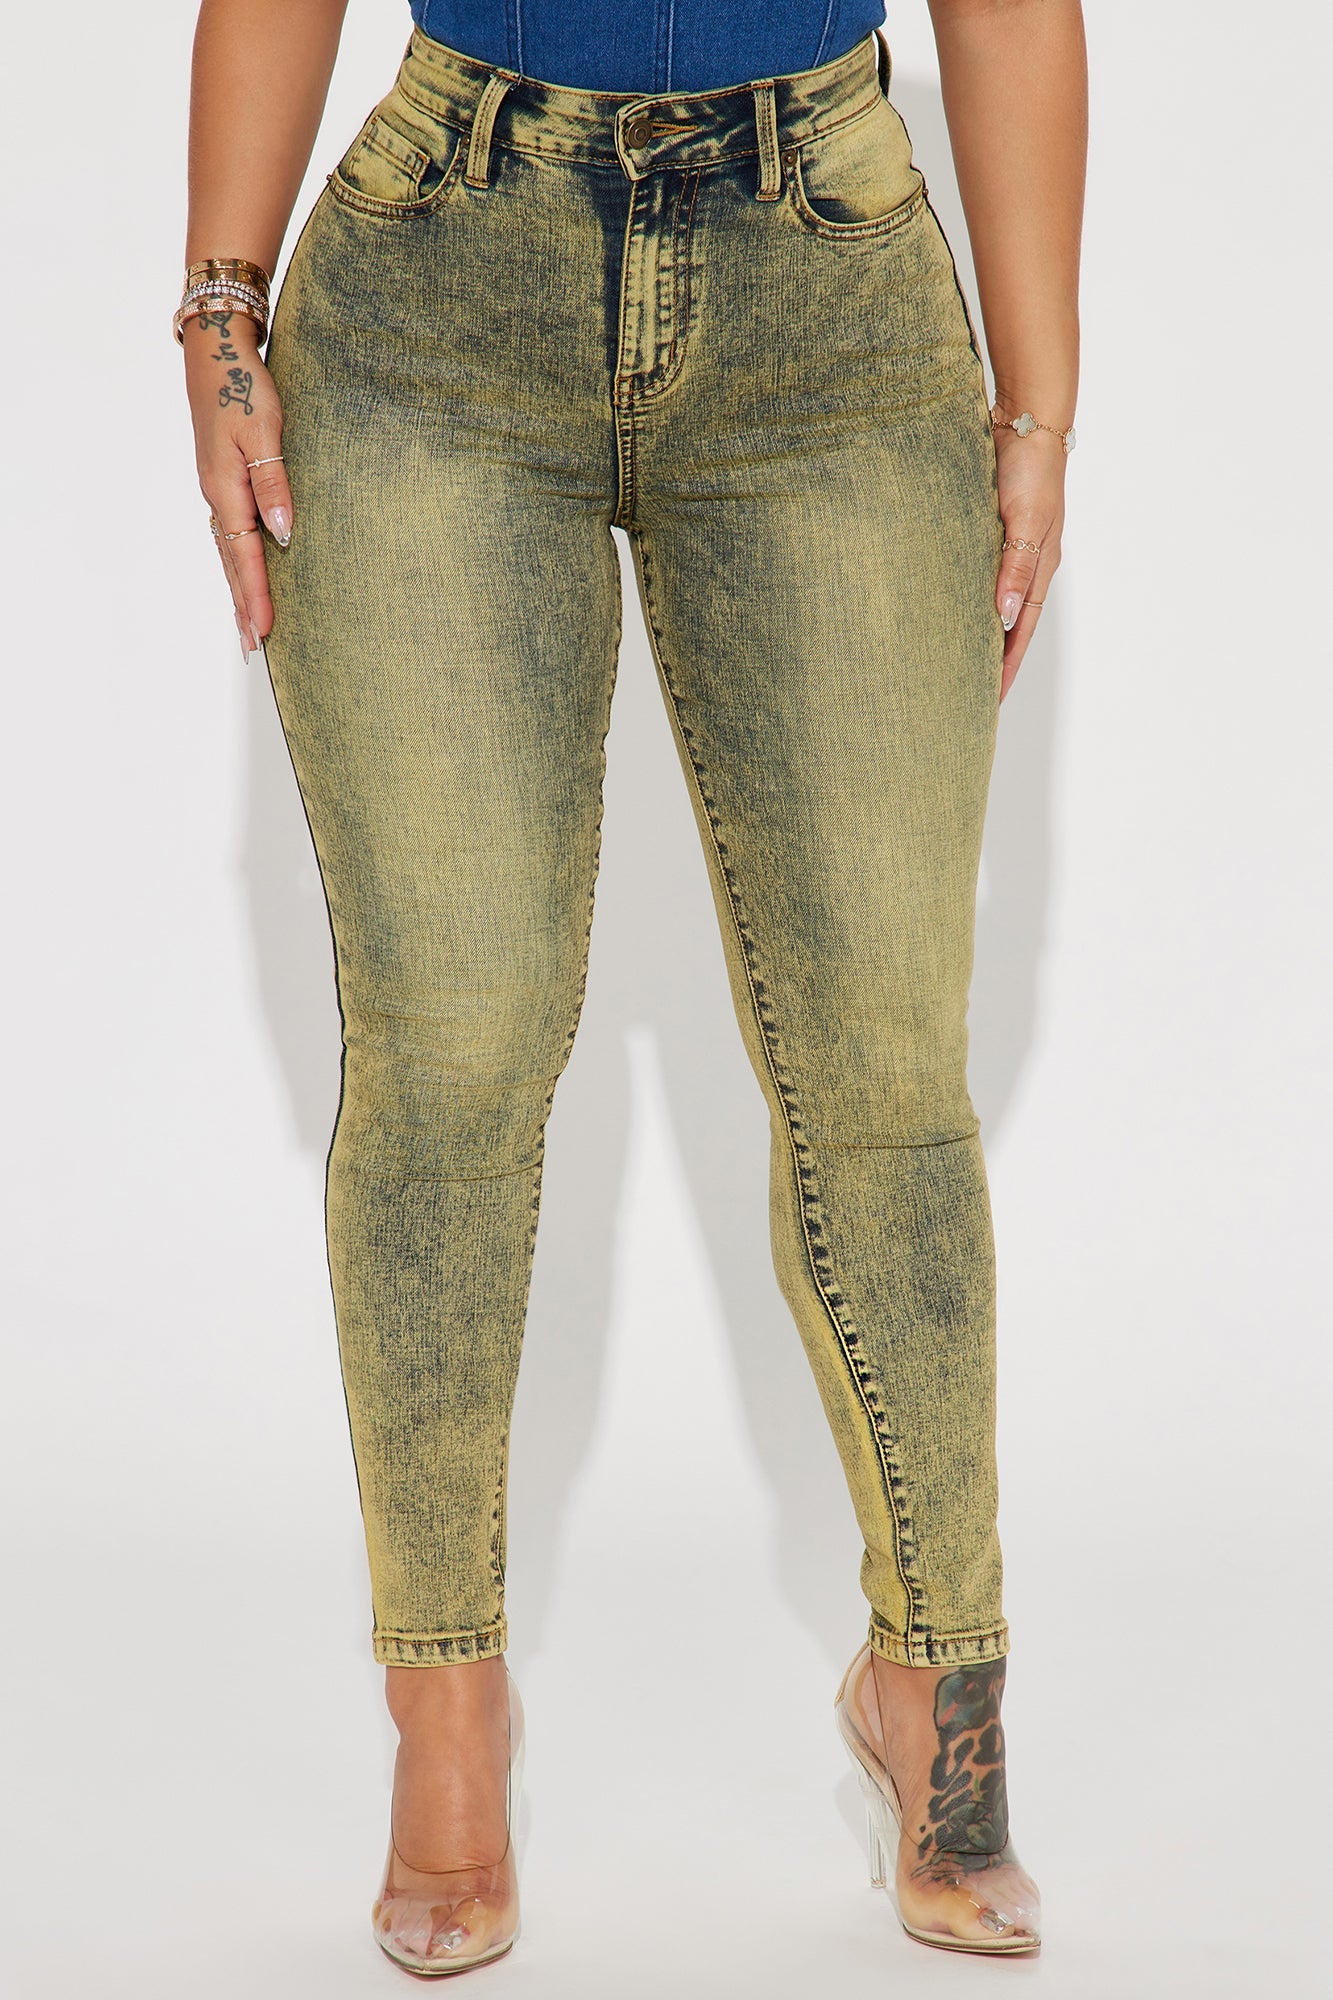 It's Giving High Stretch Curvy Skinny Jeans - Yellow